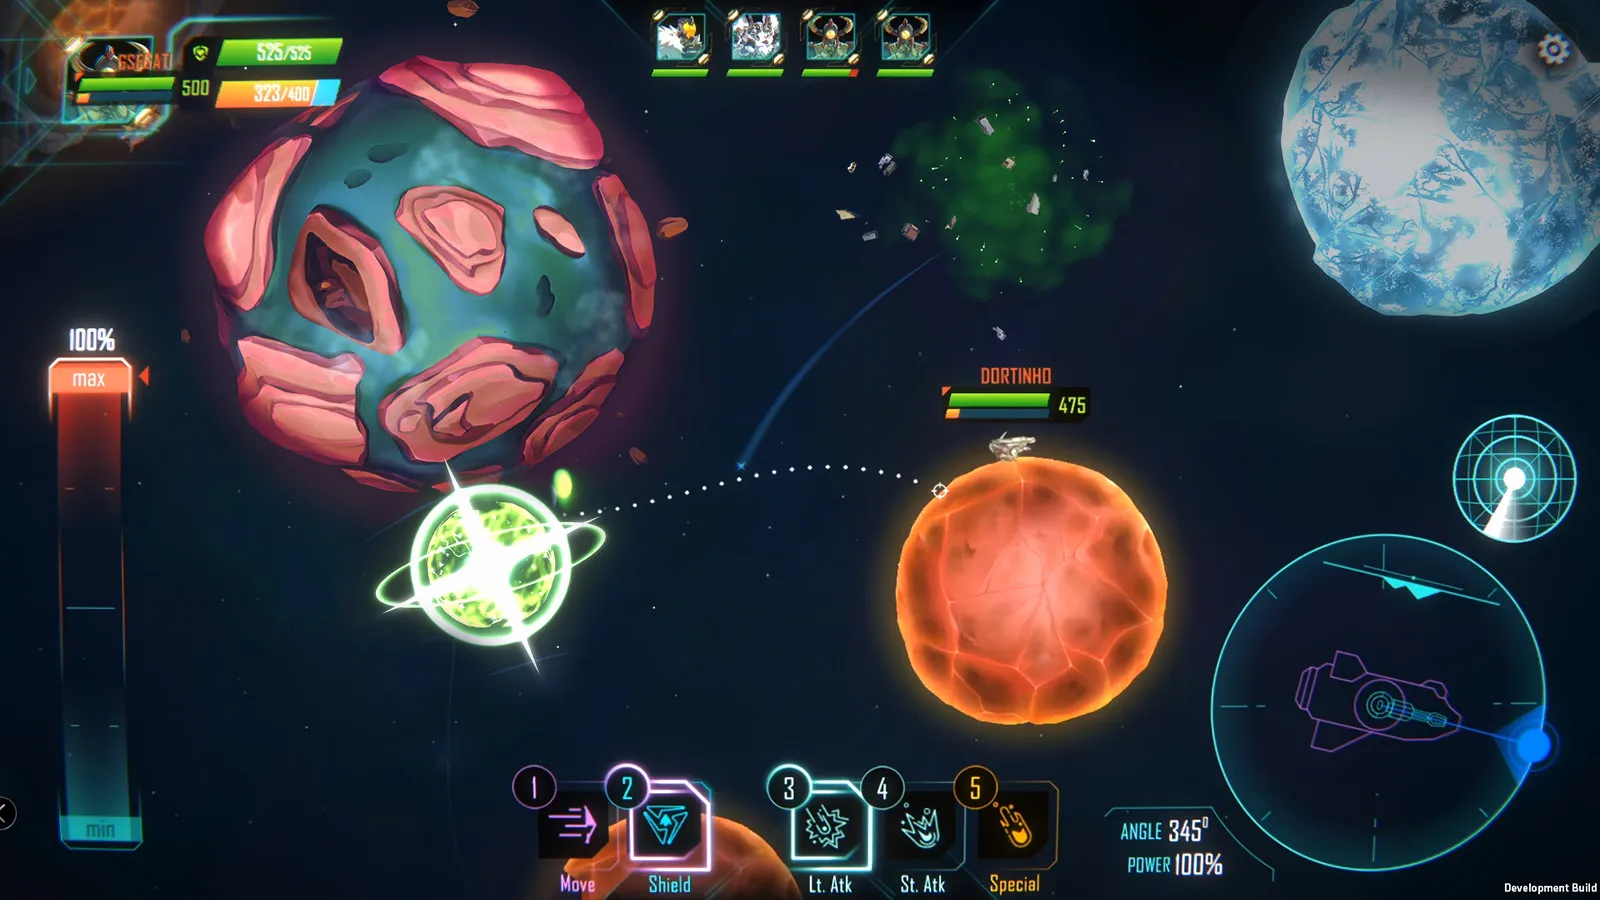 The image depicts Space Mavericks' gameplay, showcasing the skills of a commander in the game as they strive to be the last one standing and claim victory.